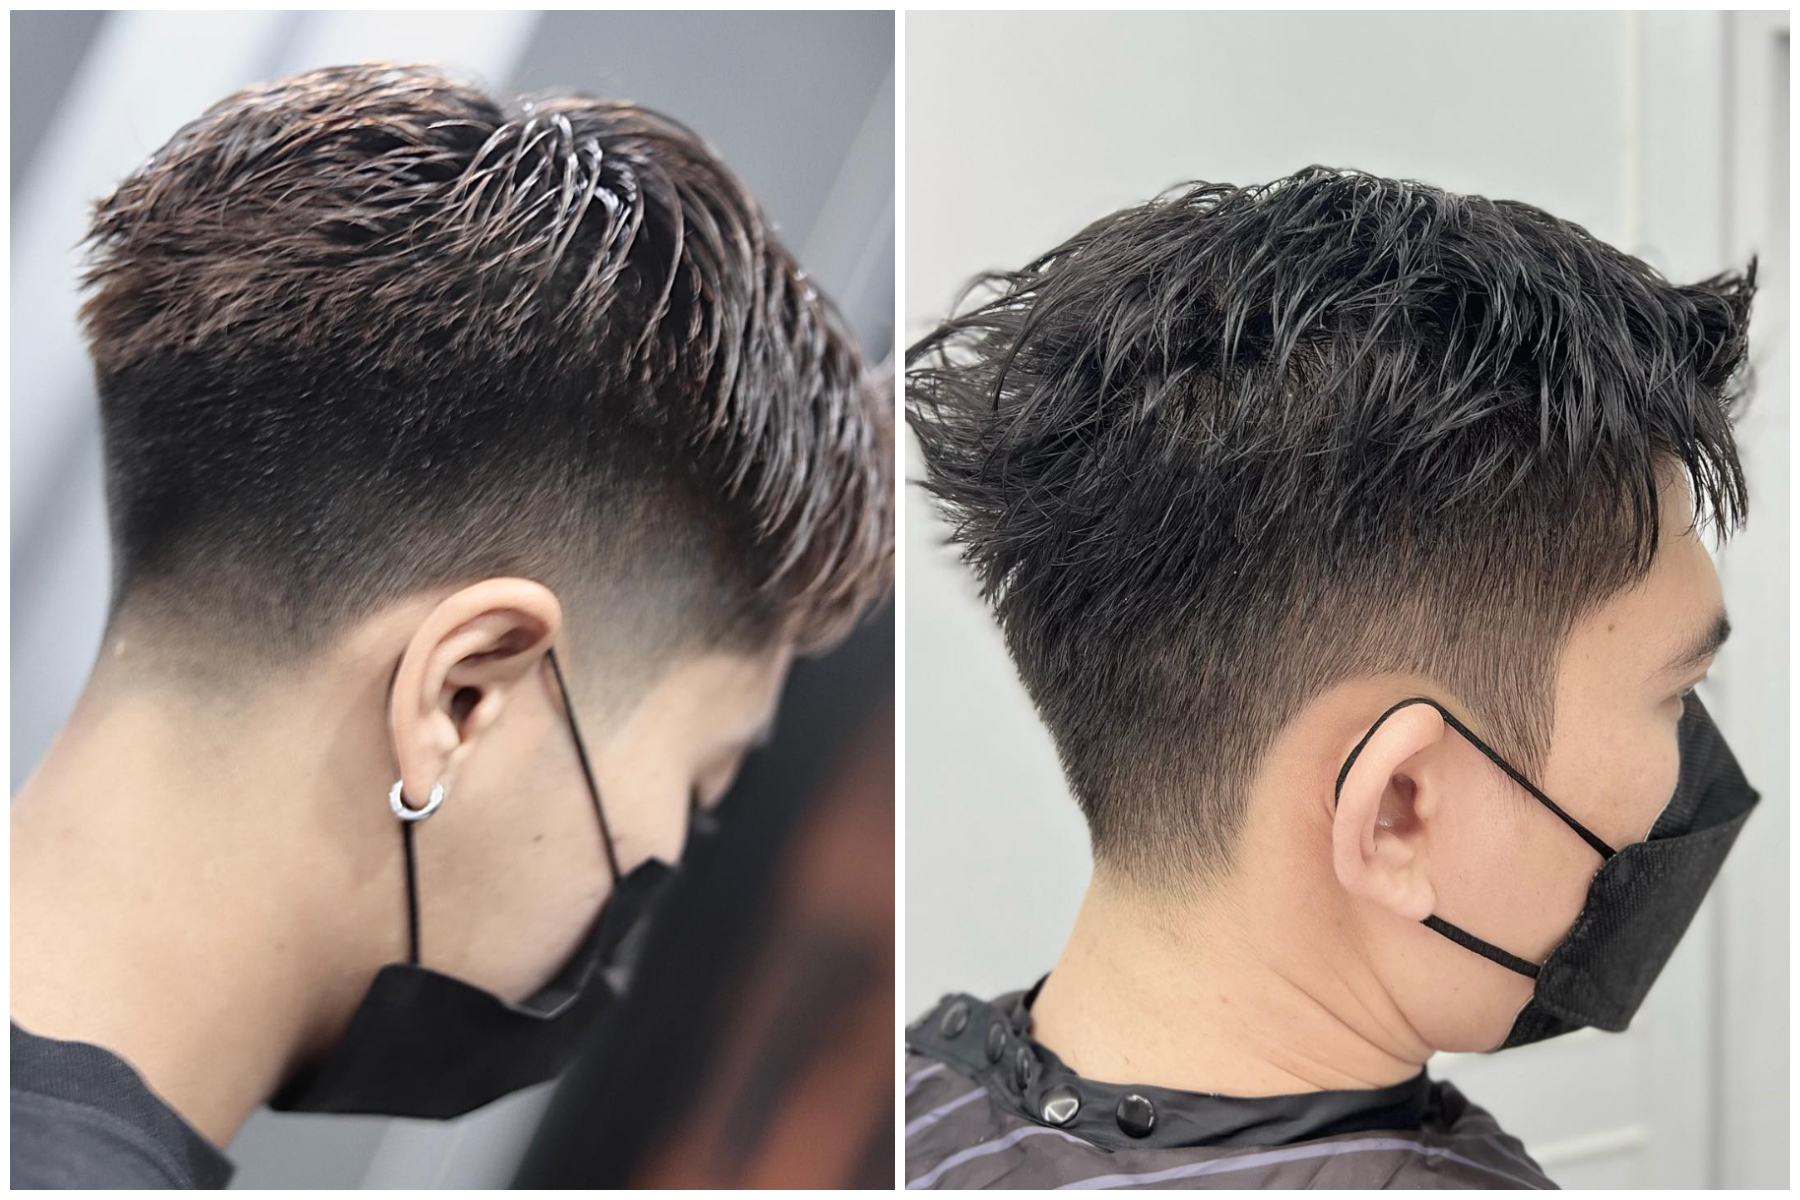 Undercut hairstyle with spiky quiff